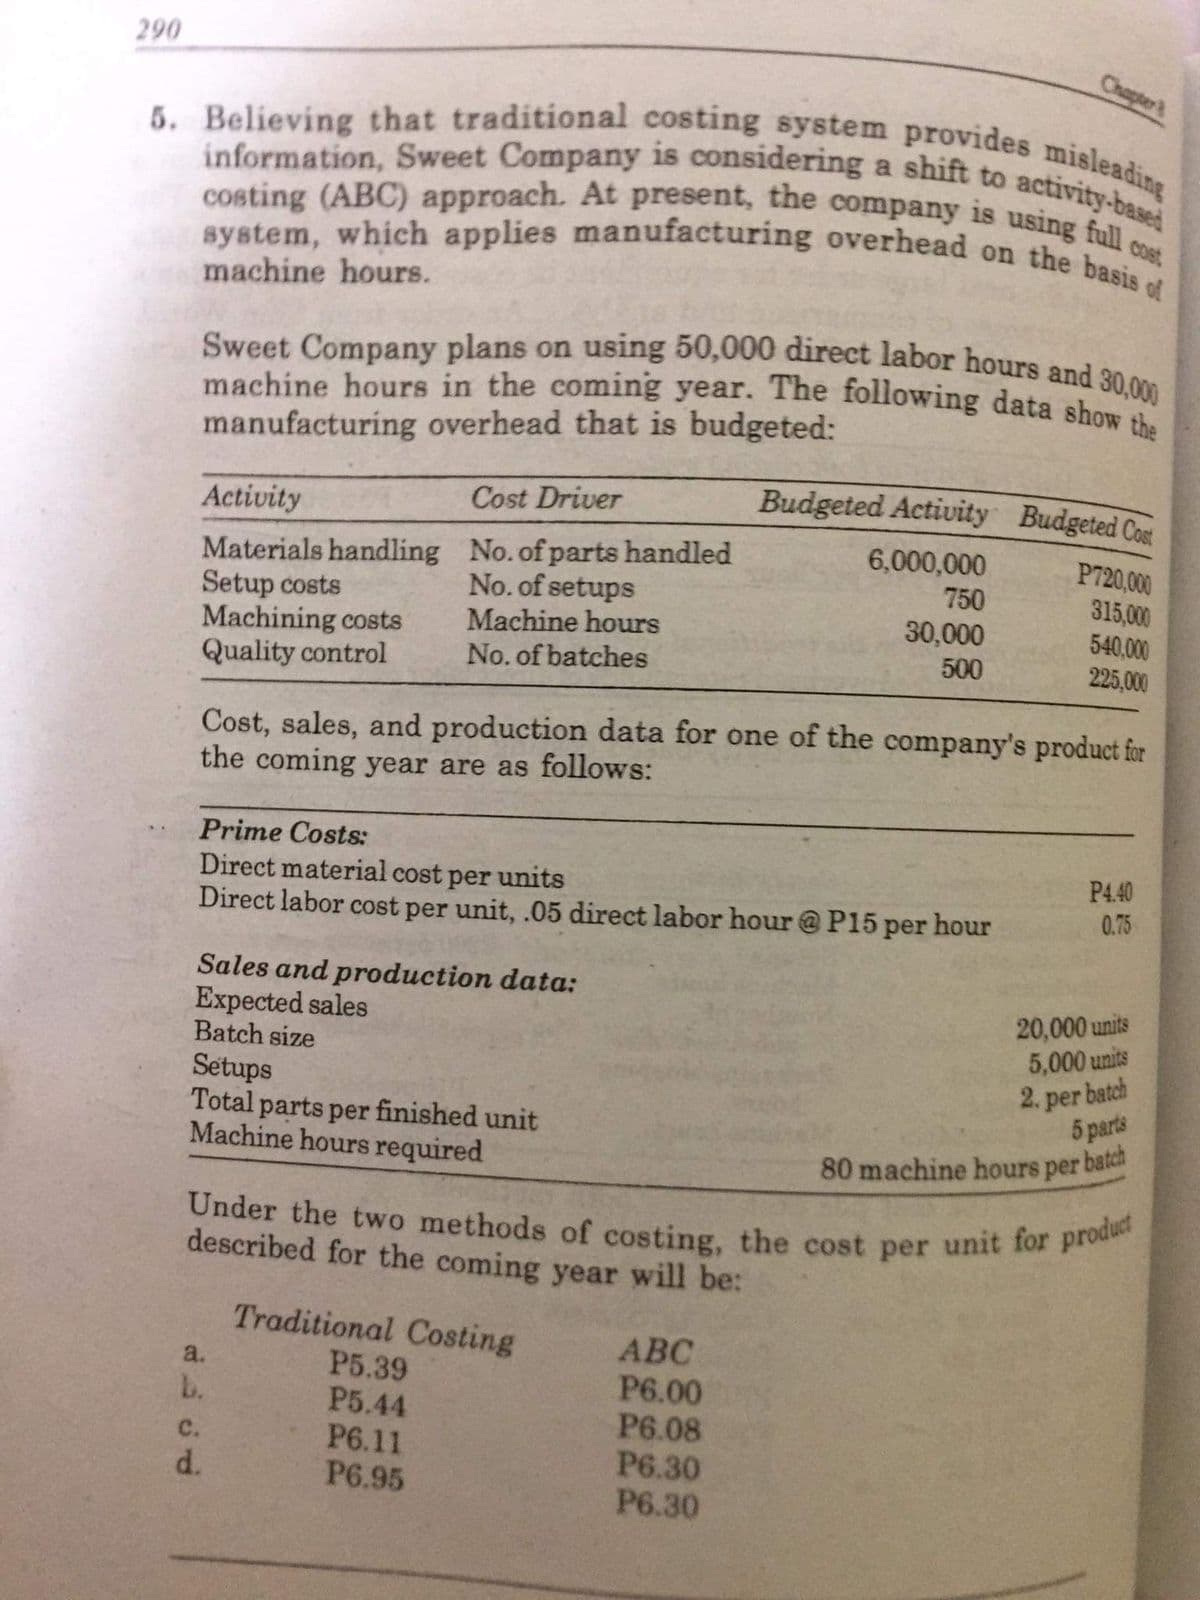 Under the two methods of costing, the cost per unit for product
system, which applies manufacturing overhead on the basis of
5. Believing that traditional costing system provides misleading
Sweet Company plans on using 50,000 direct labor hours and 30,000
machine hours in the coming year. The following data show the
information, Sweet Company is considering a shift to activity-based
costing (ABC) approach. At present, the company is using full cost
290
Chapter
machine hours.
manufacturing overhead that is budgeted:
Activity
Cost Driver
Budgeted Activity Budgeted Con
Materials handling No.of parts handled
Setup costs
Machining costs
Quality control
6,000,000
P720,000
315,000
No. of setups
750
30,000
Machine hours
No. of batches
540,000
500
225,000
Cost, sales, and production data for one of the company's product for
the coming year are as follows:
Prime Costs:
Direct material cost per units
Direct labor cost per unit, .05 direct labor hour @ P15 per hour
P440
0.75
Sales and production data:
Expected sales
Batch size
Setups
Total parts per finished unit
Machine hours required
20,000 units
5,000 units
2. per batch
5 parts
batch
80 machine hours per
described for the coming year will be:
Traditional Costing
P5.39
P5.44
P6.11
P6.95
АВС
P6.00
P6.08
P6.30
P6.30
a.
b.
с.
d.
